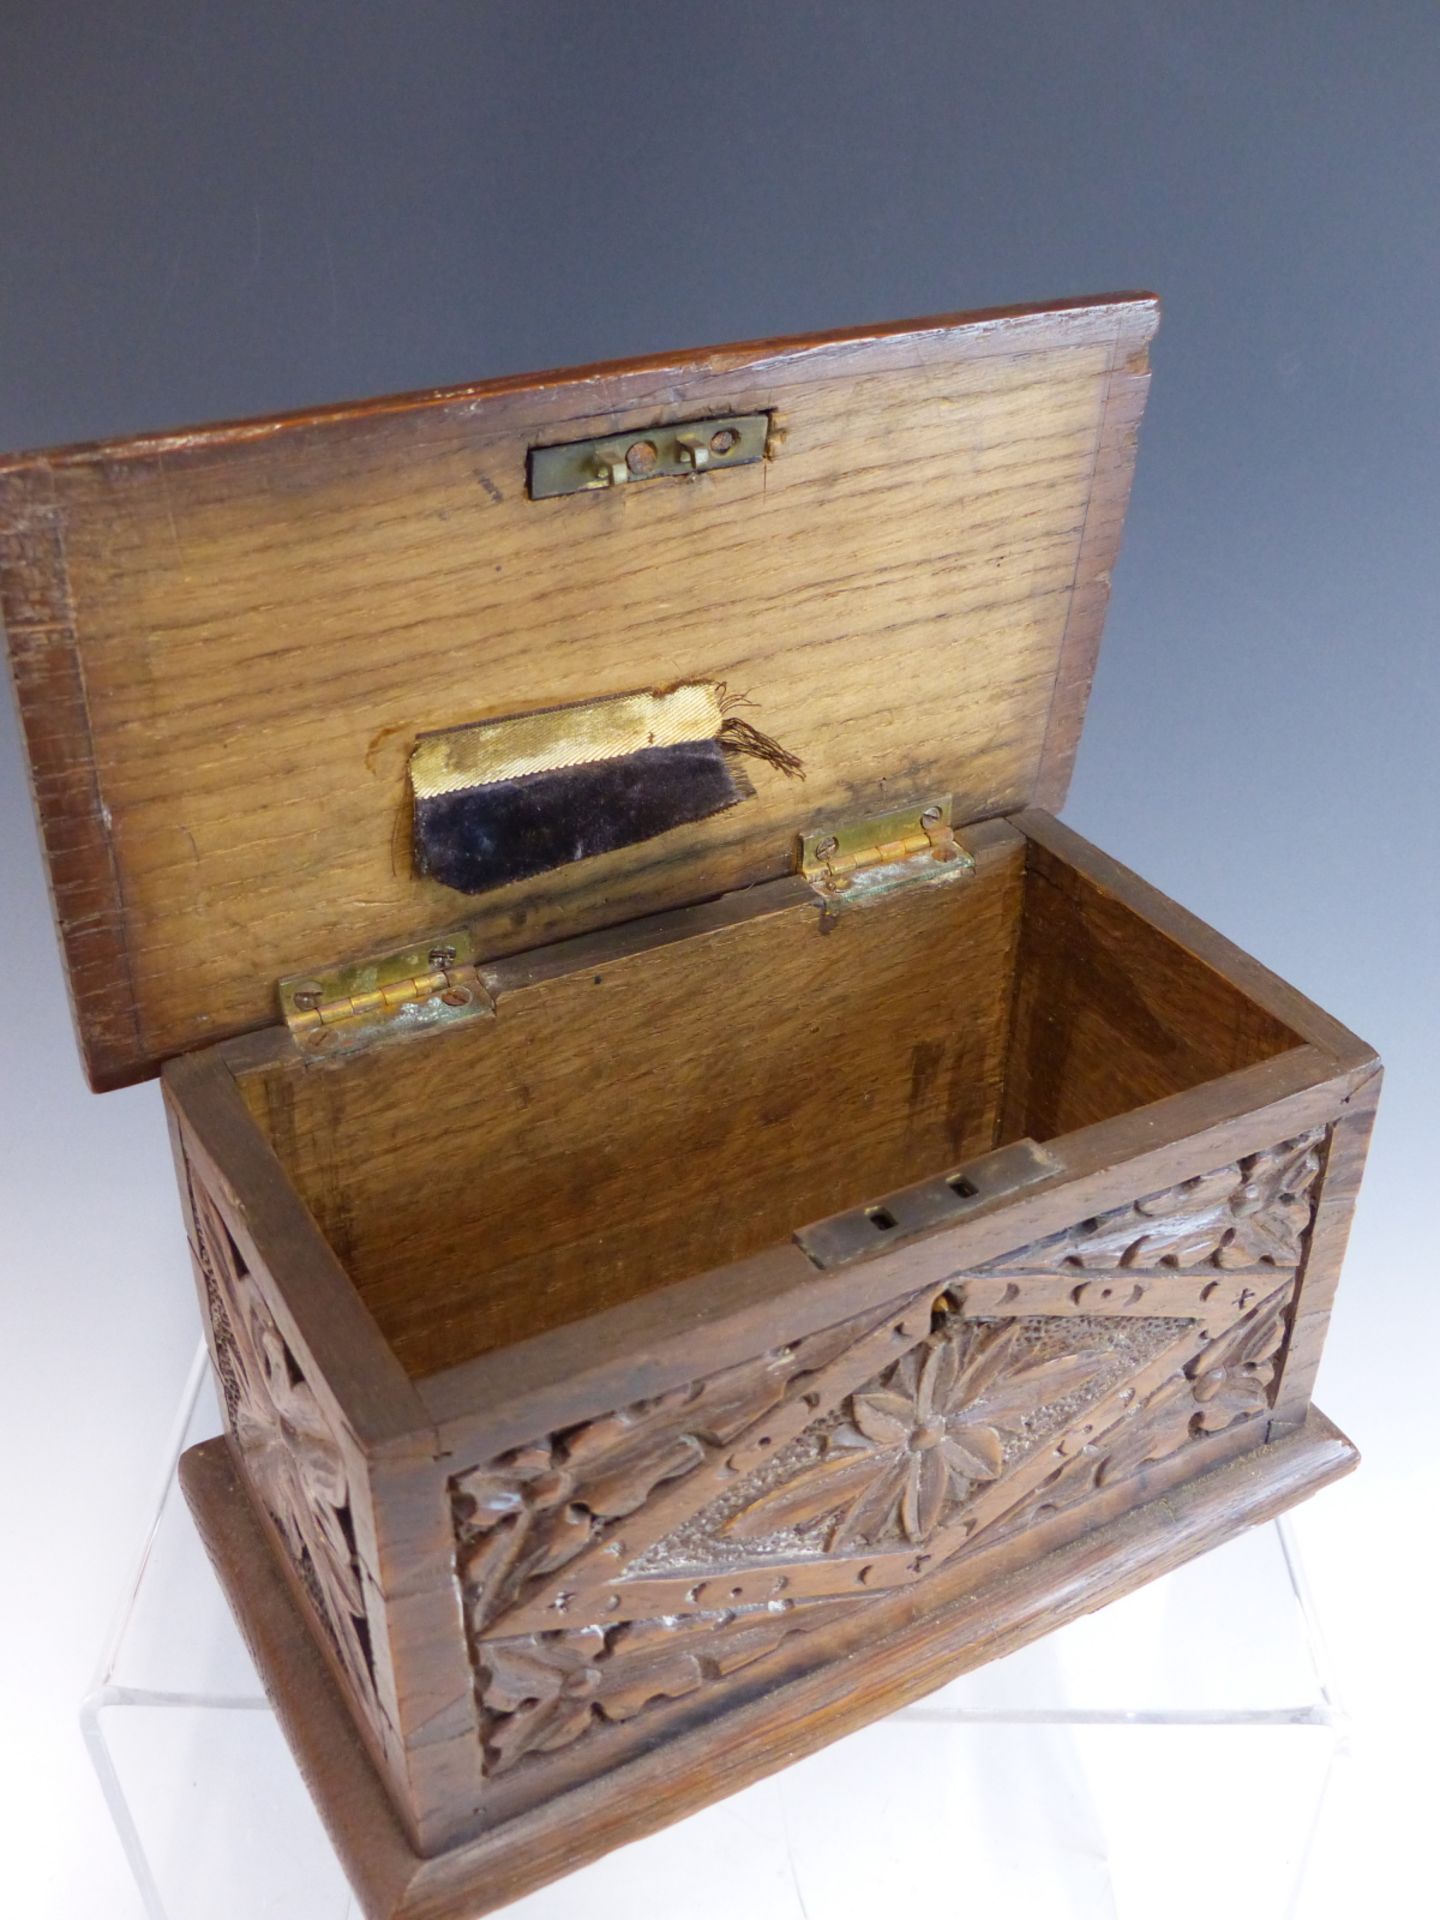 A VICTORIAN CARVED OAK MONEY CASKET, CARVED FROM BEAMS OF HMS FOUDROYANT. - Image 4 of 5